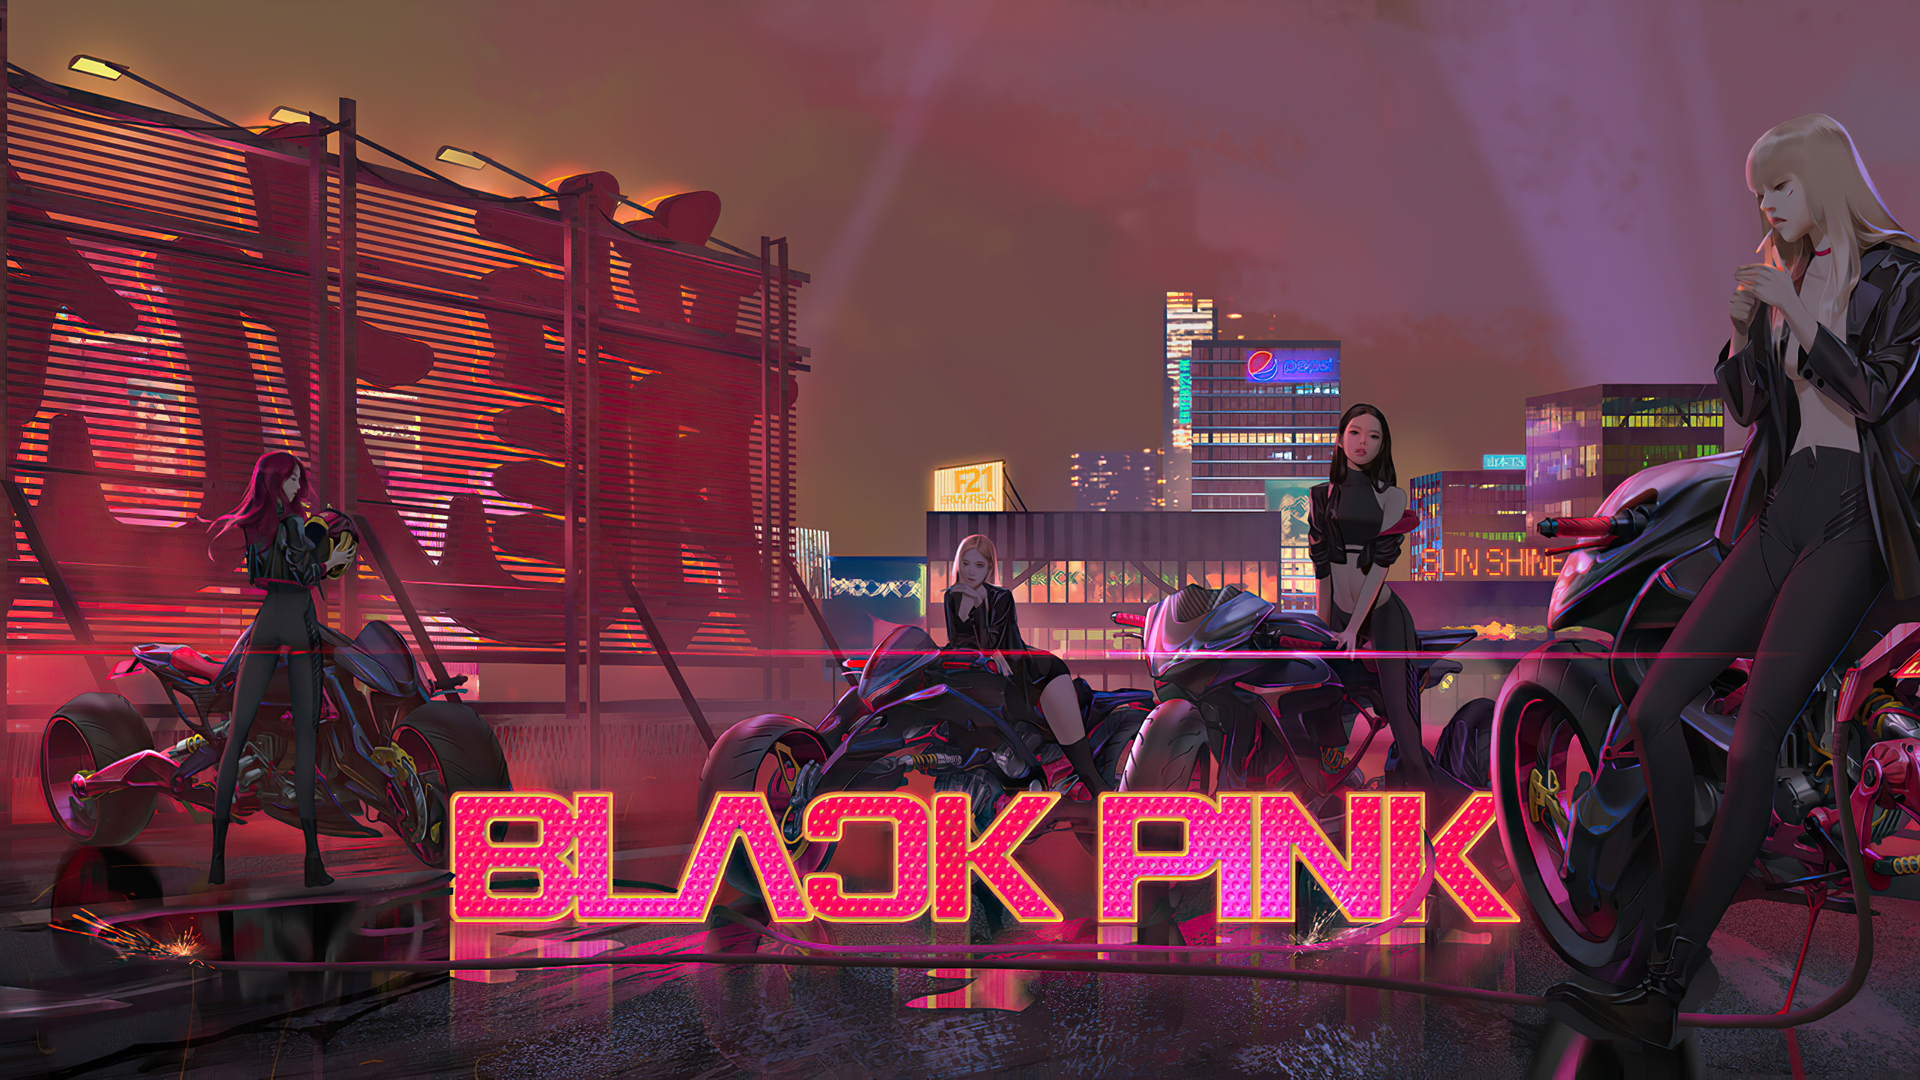 1920x1080 Blackpink 4k Laptop Full Hd 1080p Hd 4k Wallpapers Images Backgrounds Photos And Pictures